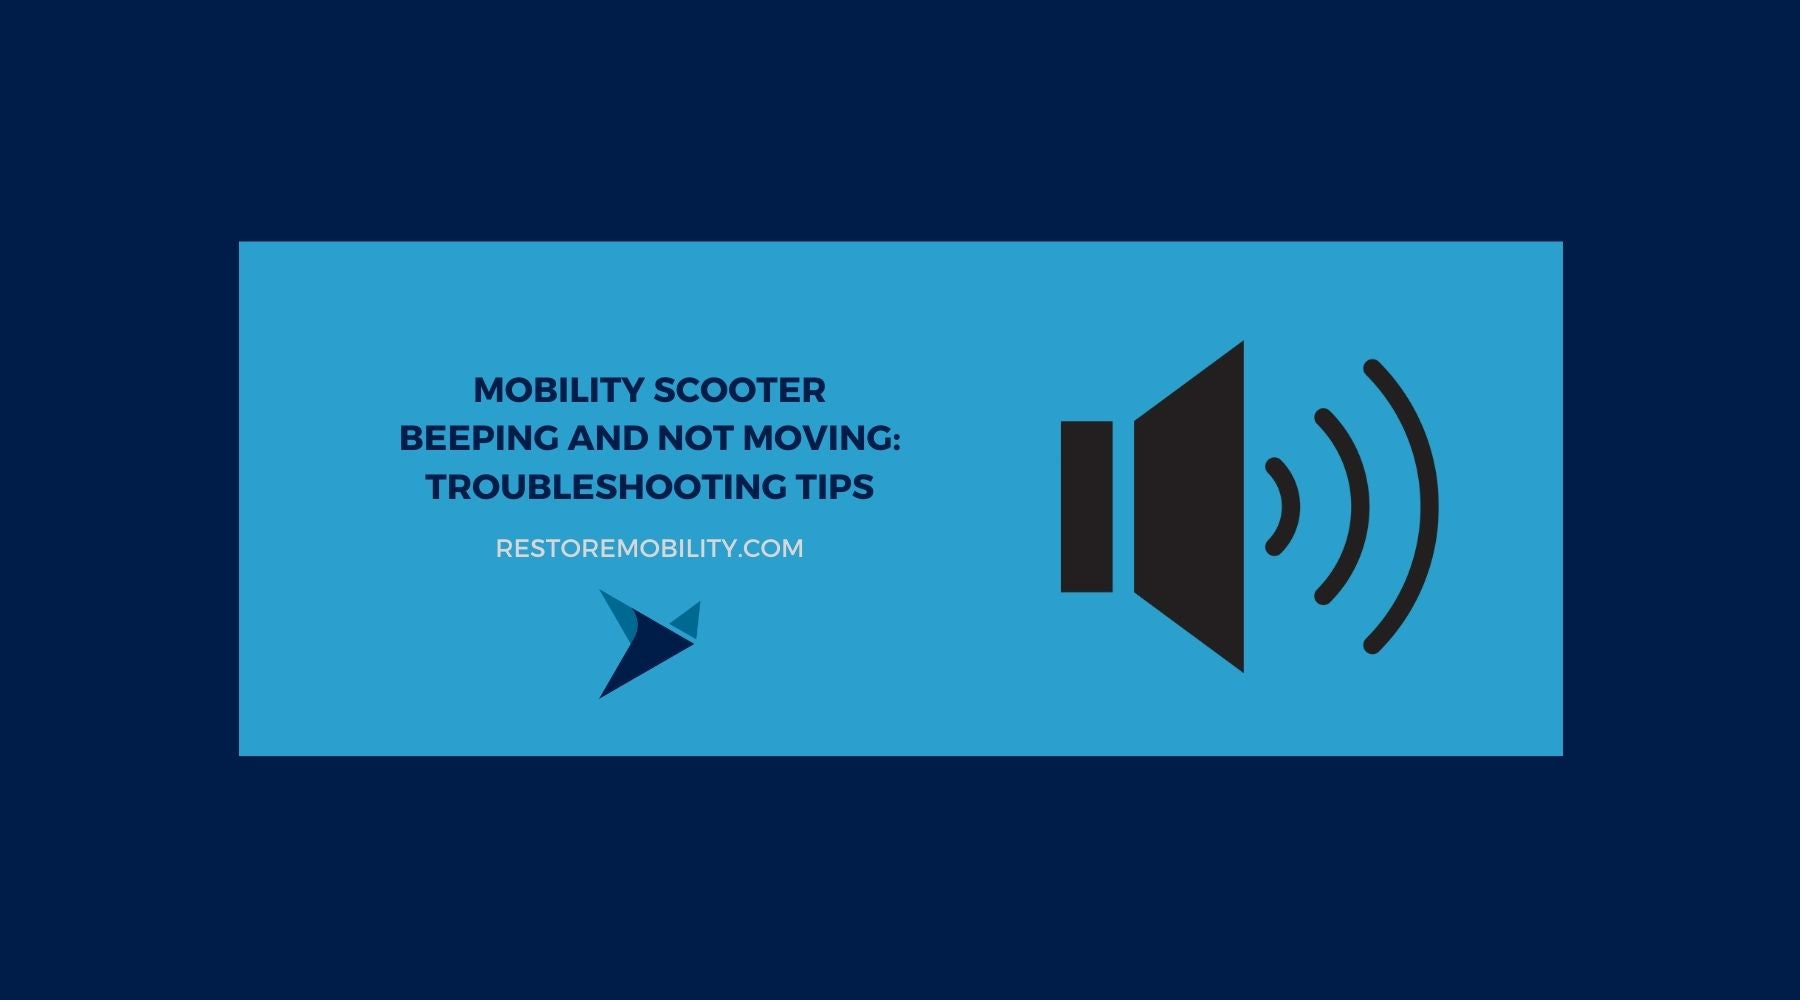 Mobility Scooter Beeping and Not Moving: Troubleshooting Tips